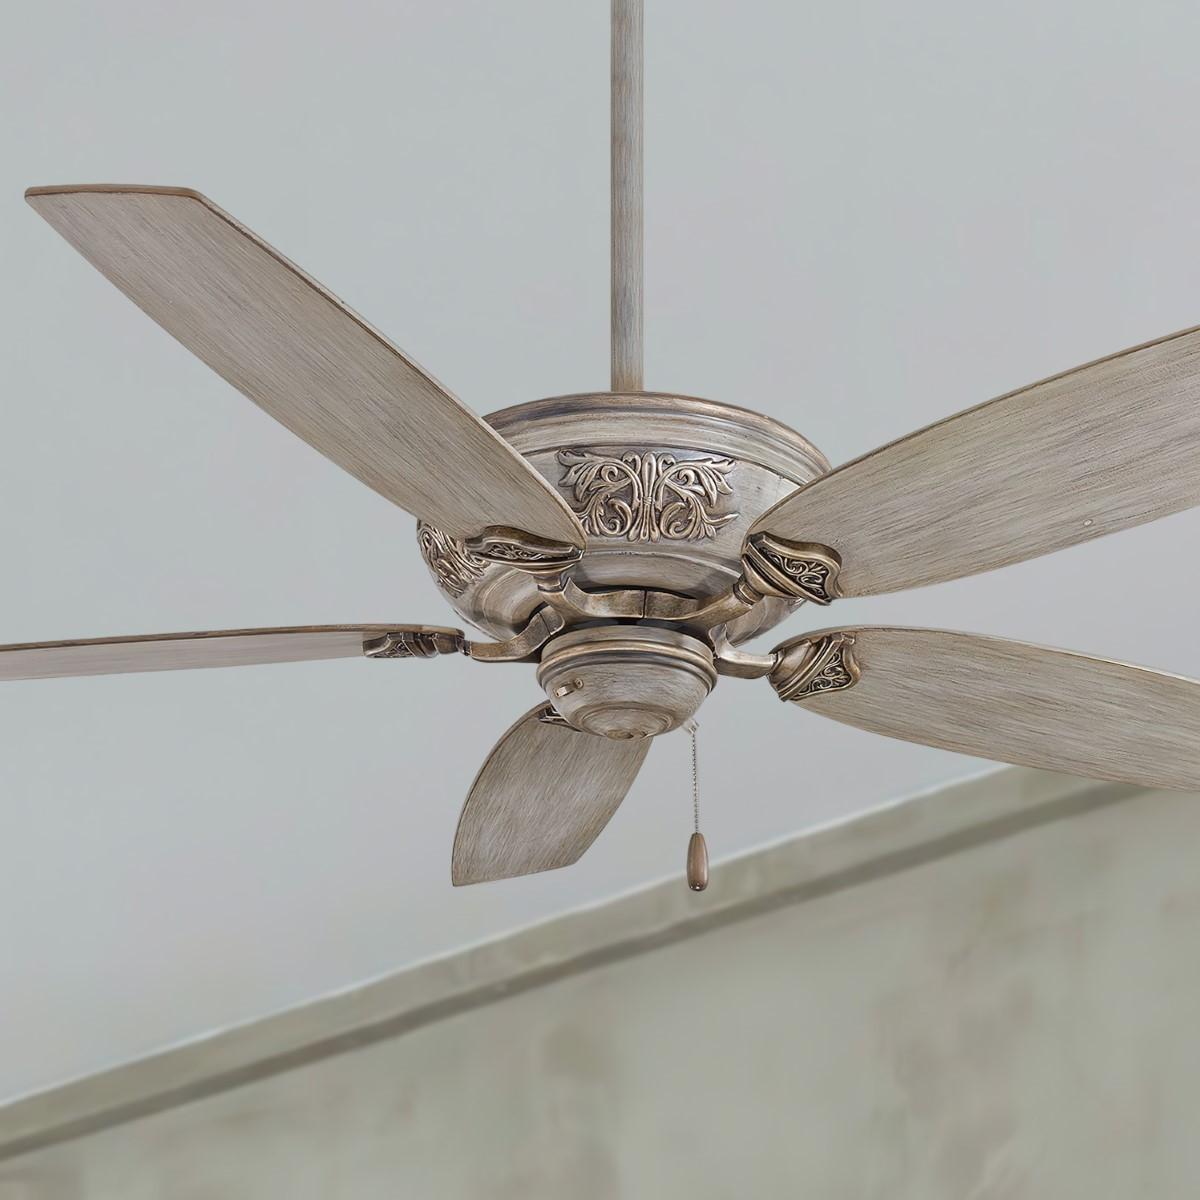 Classica 54 Inch Ceiling Fan With Pull Chain